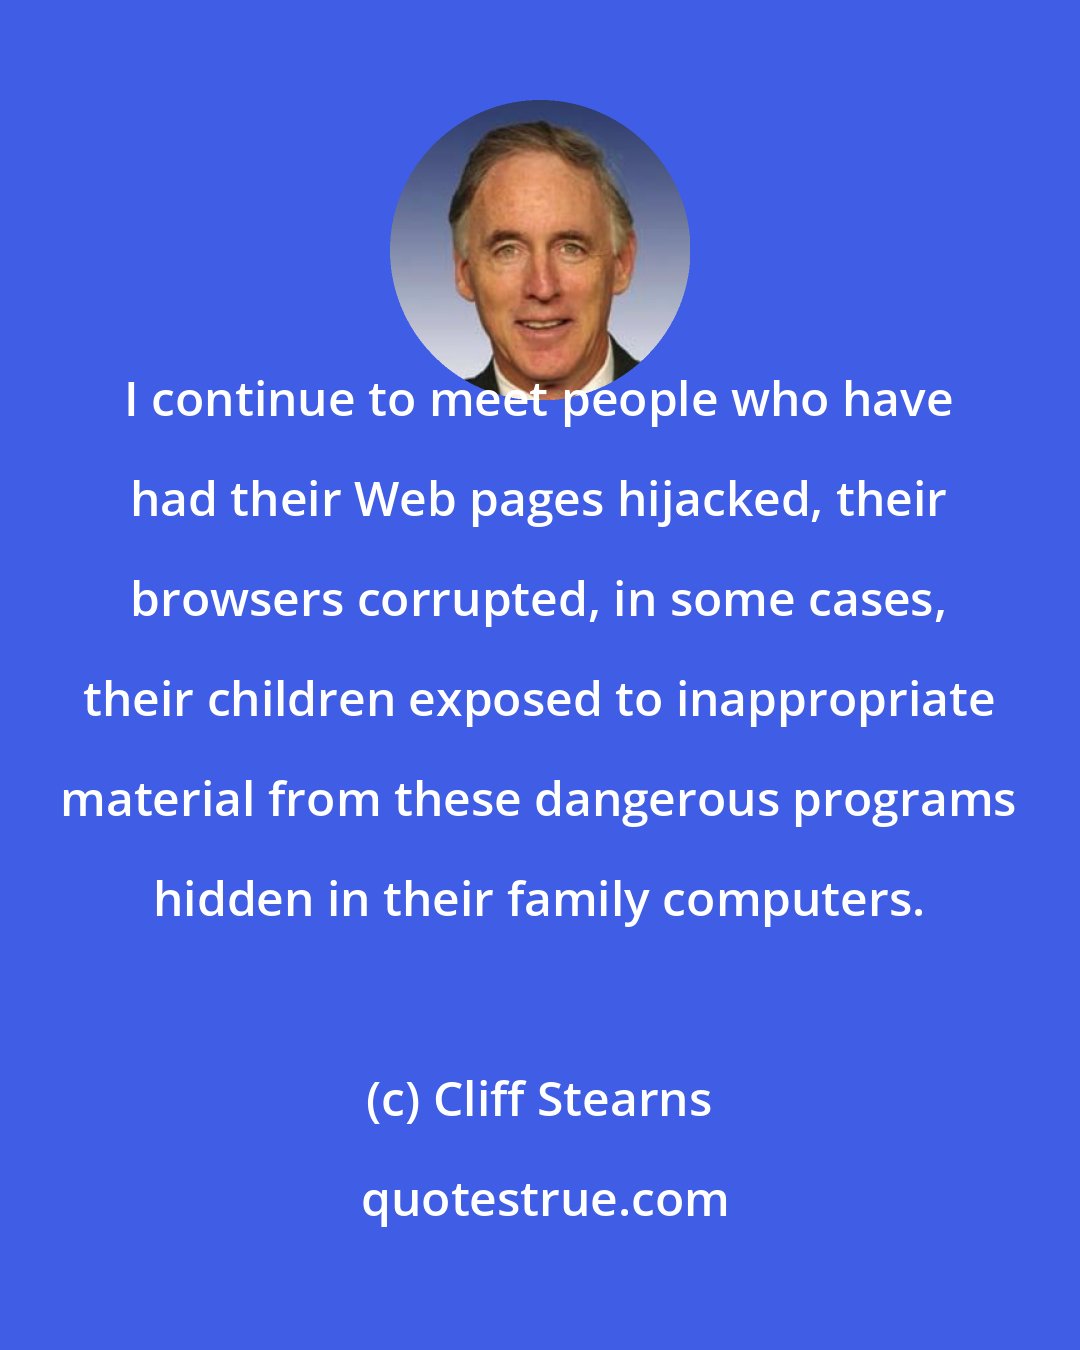 Cliff Stearns: I continue to meet people who have had their Web pages hijacked, their browsers corrupted, in some cases, their children exposed to inappropriate material from these dangerous programs hidden in their family computers.